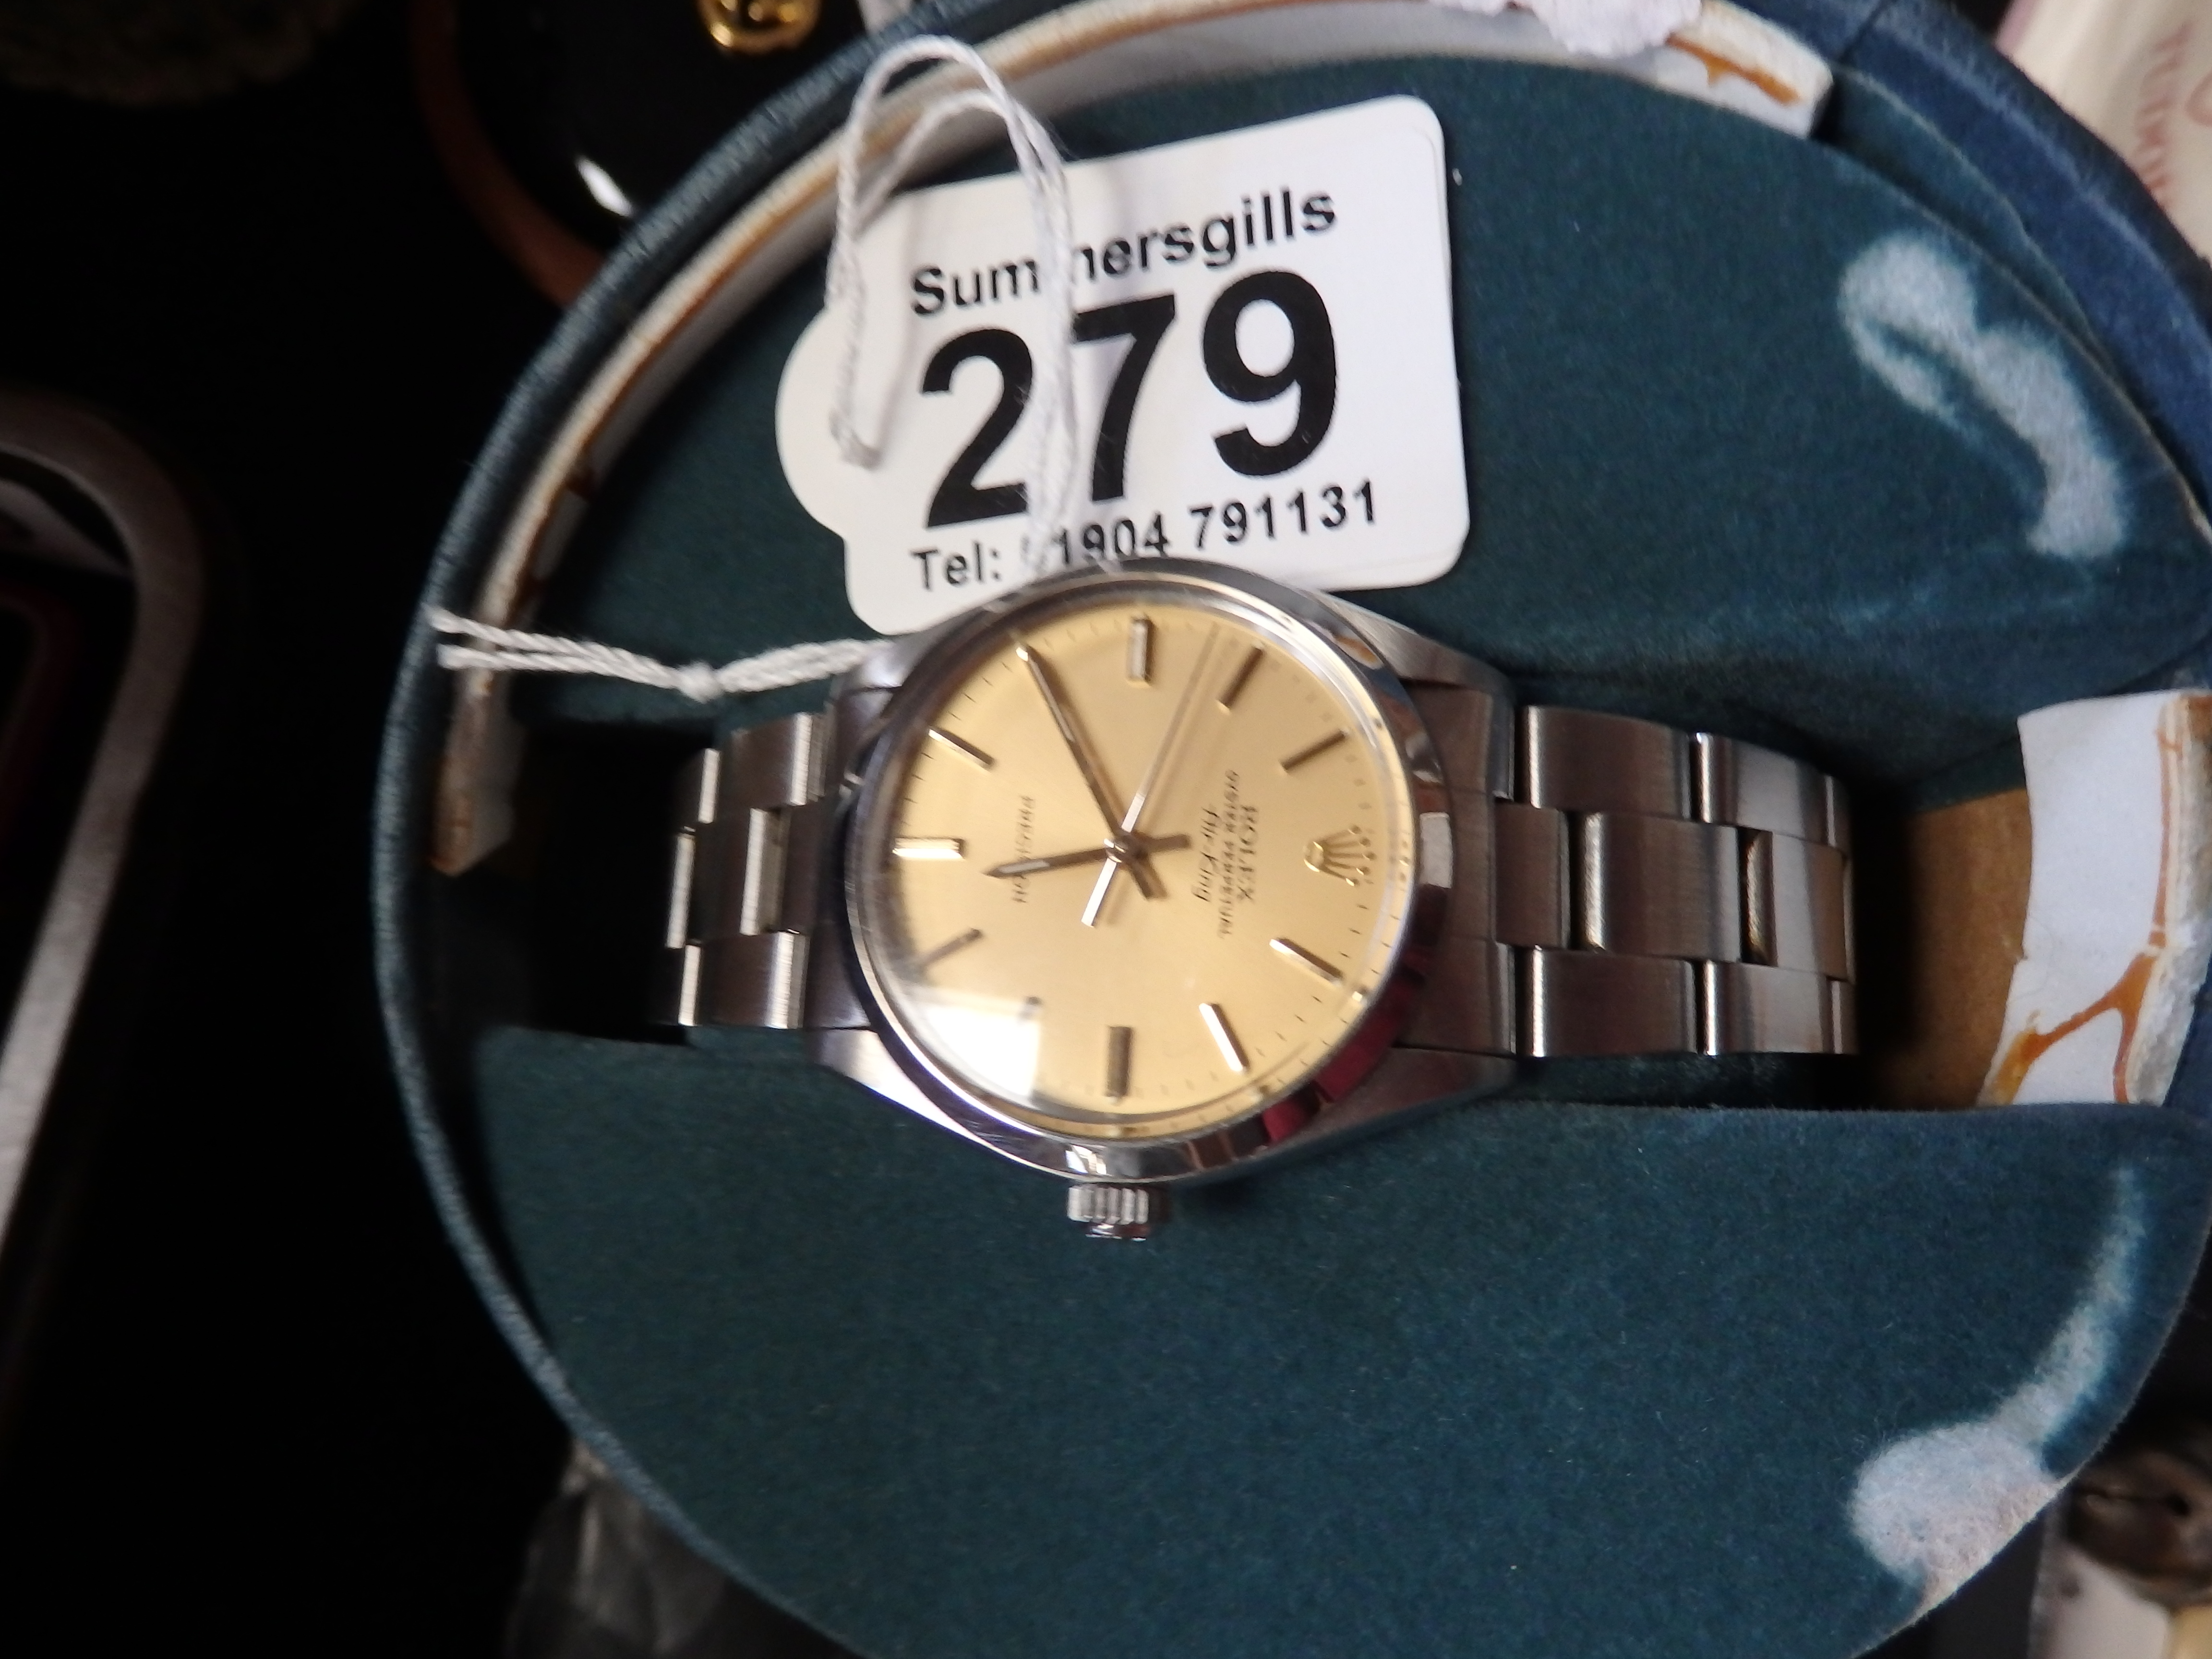 Gents Rolex Oyster Air King watch date purchased sept 1981